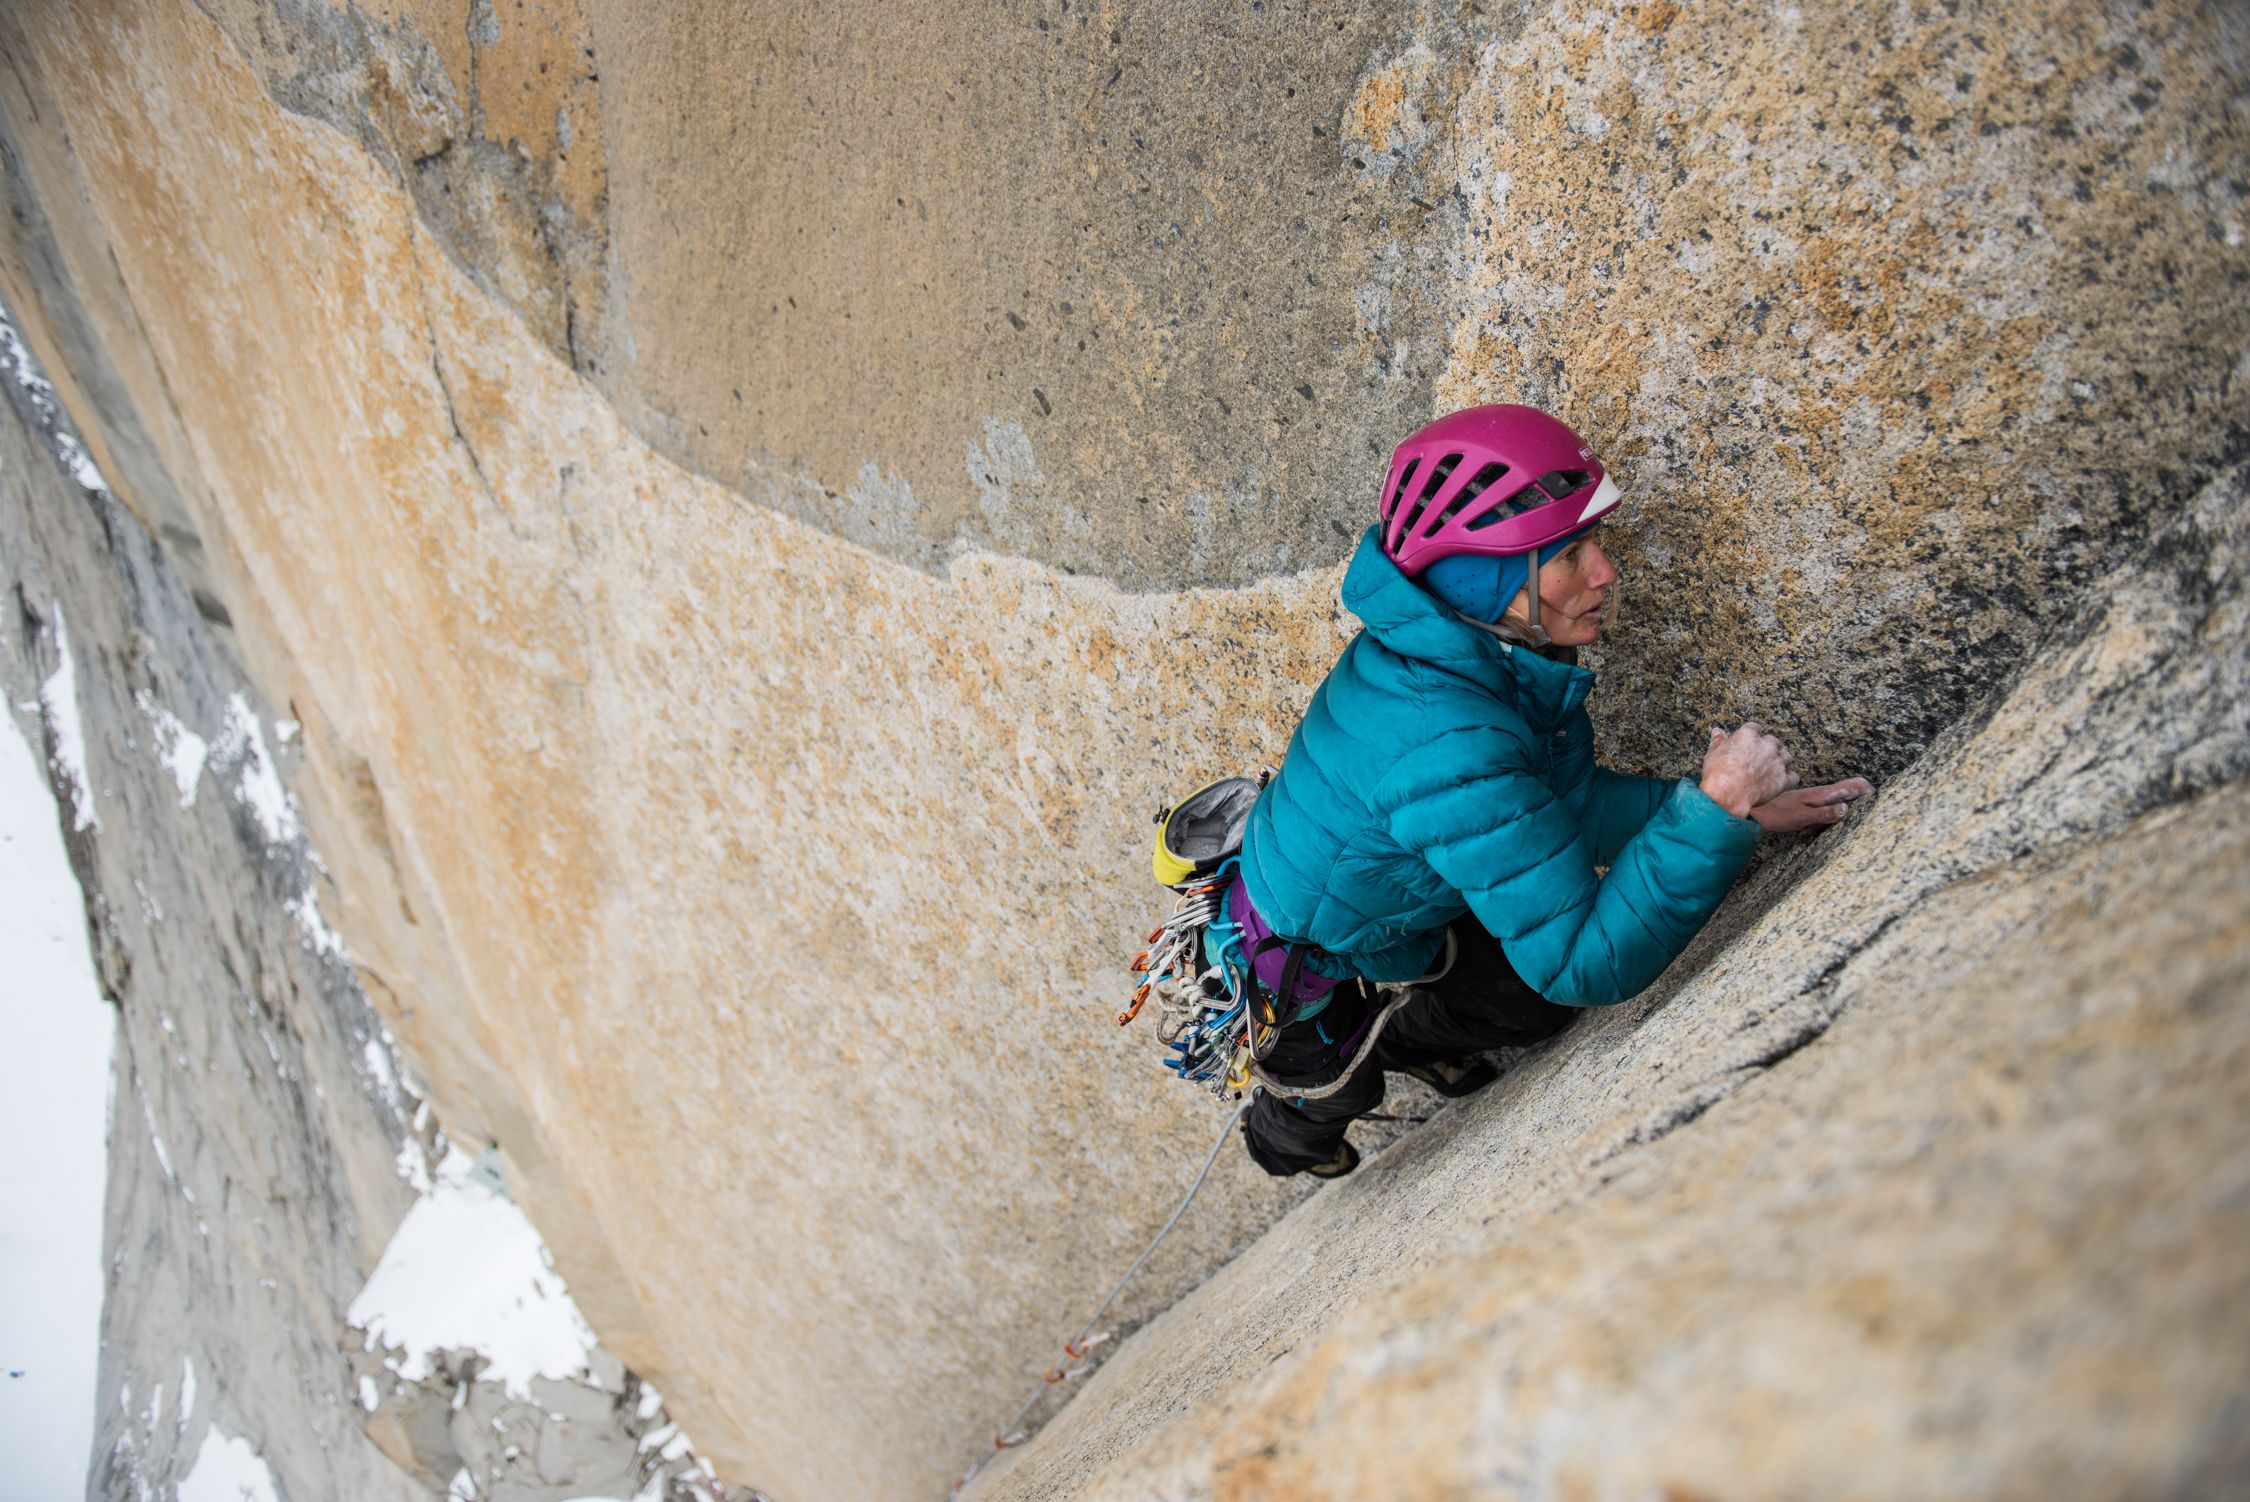 Brette Harrington leads a cold pitch on Riders on the Storm (VI 5.12d/5.13 A3, 1300m), Torre Central, Torres del Paine, Patagonia. [Photo] Drew Smith